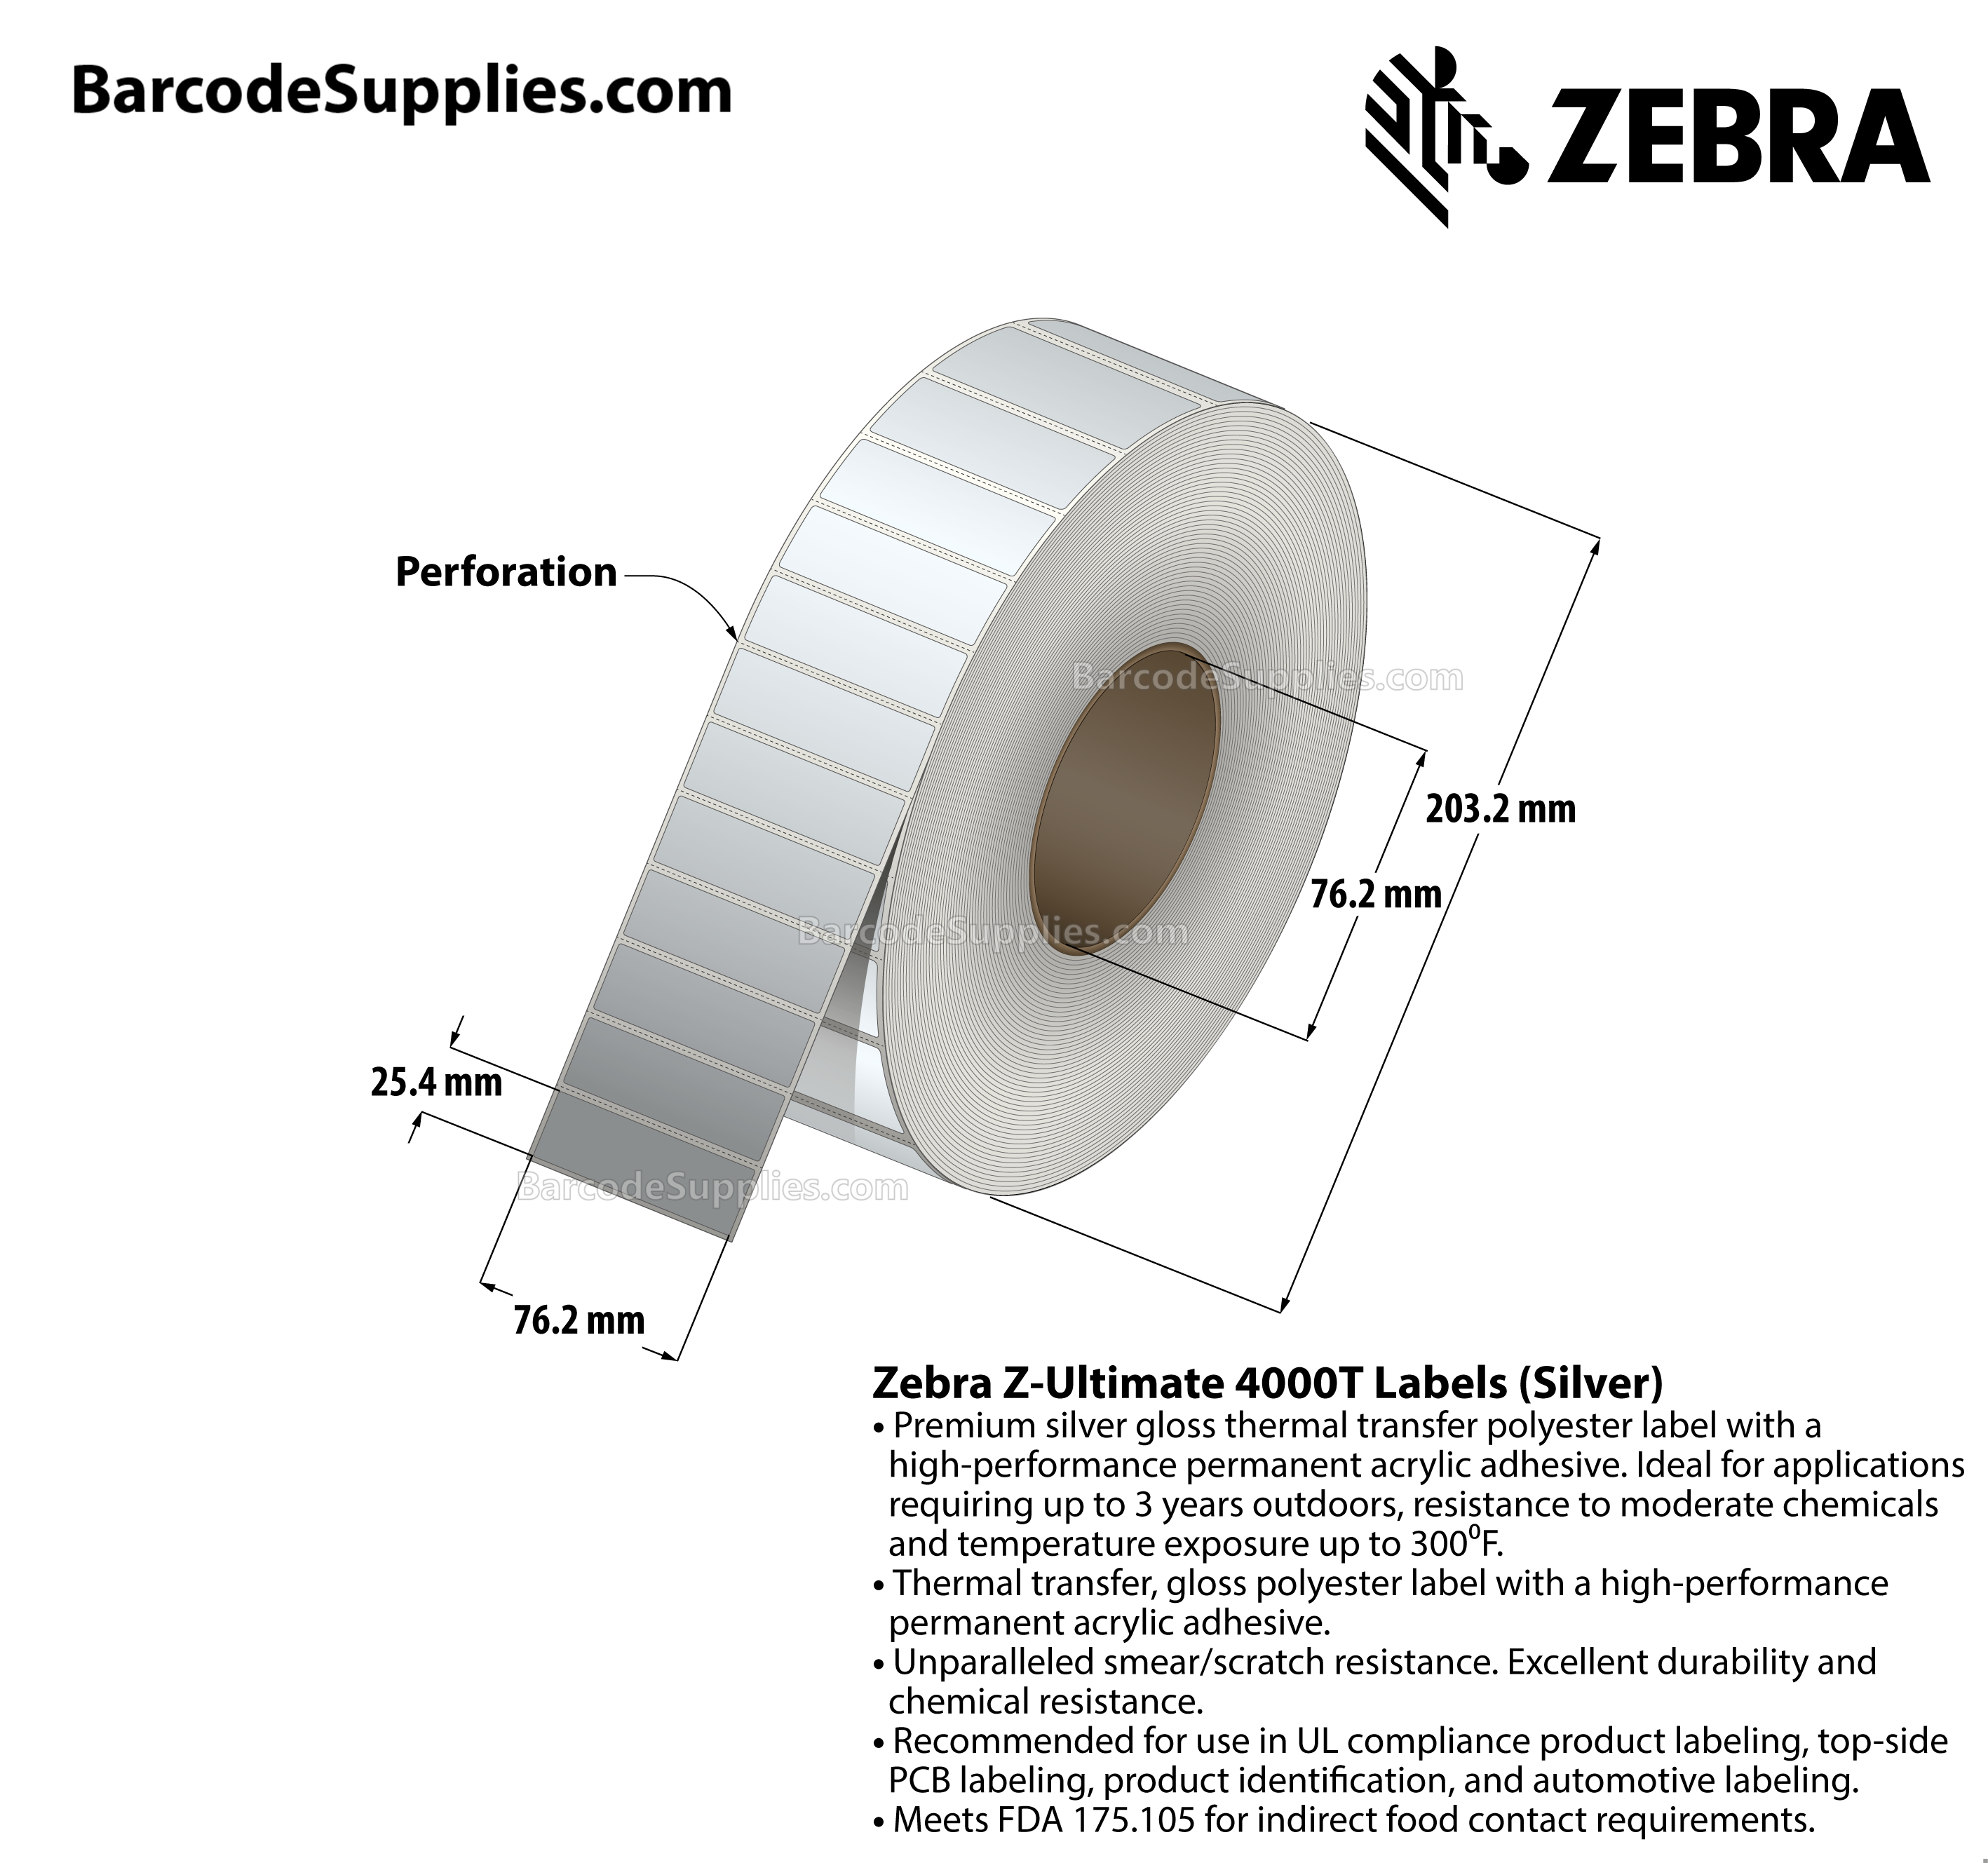 3 x 1 Thermal Transfer Silver Z-Ultimate 4000T Silver Labels With Permanent Adhesive - Perforated - 3000 Labels Per Roll - Carton Of 1 Rolls - 3000 Labels Total - MPN: 10023157